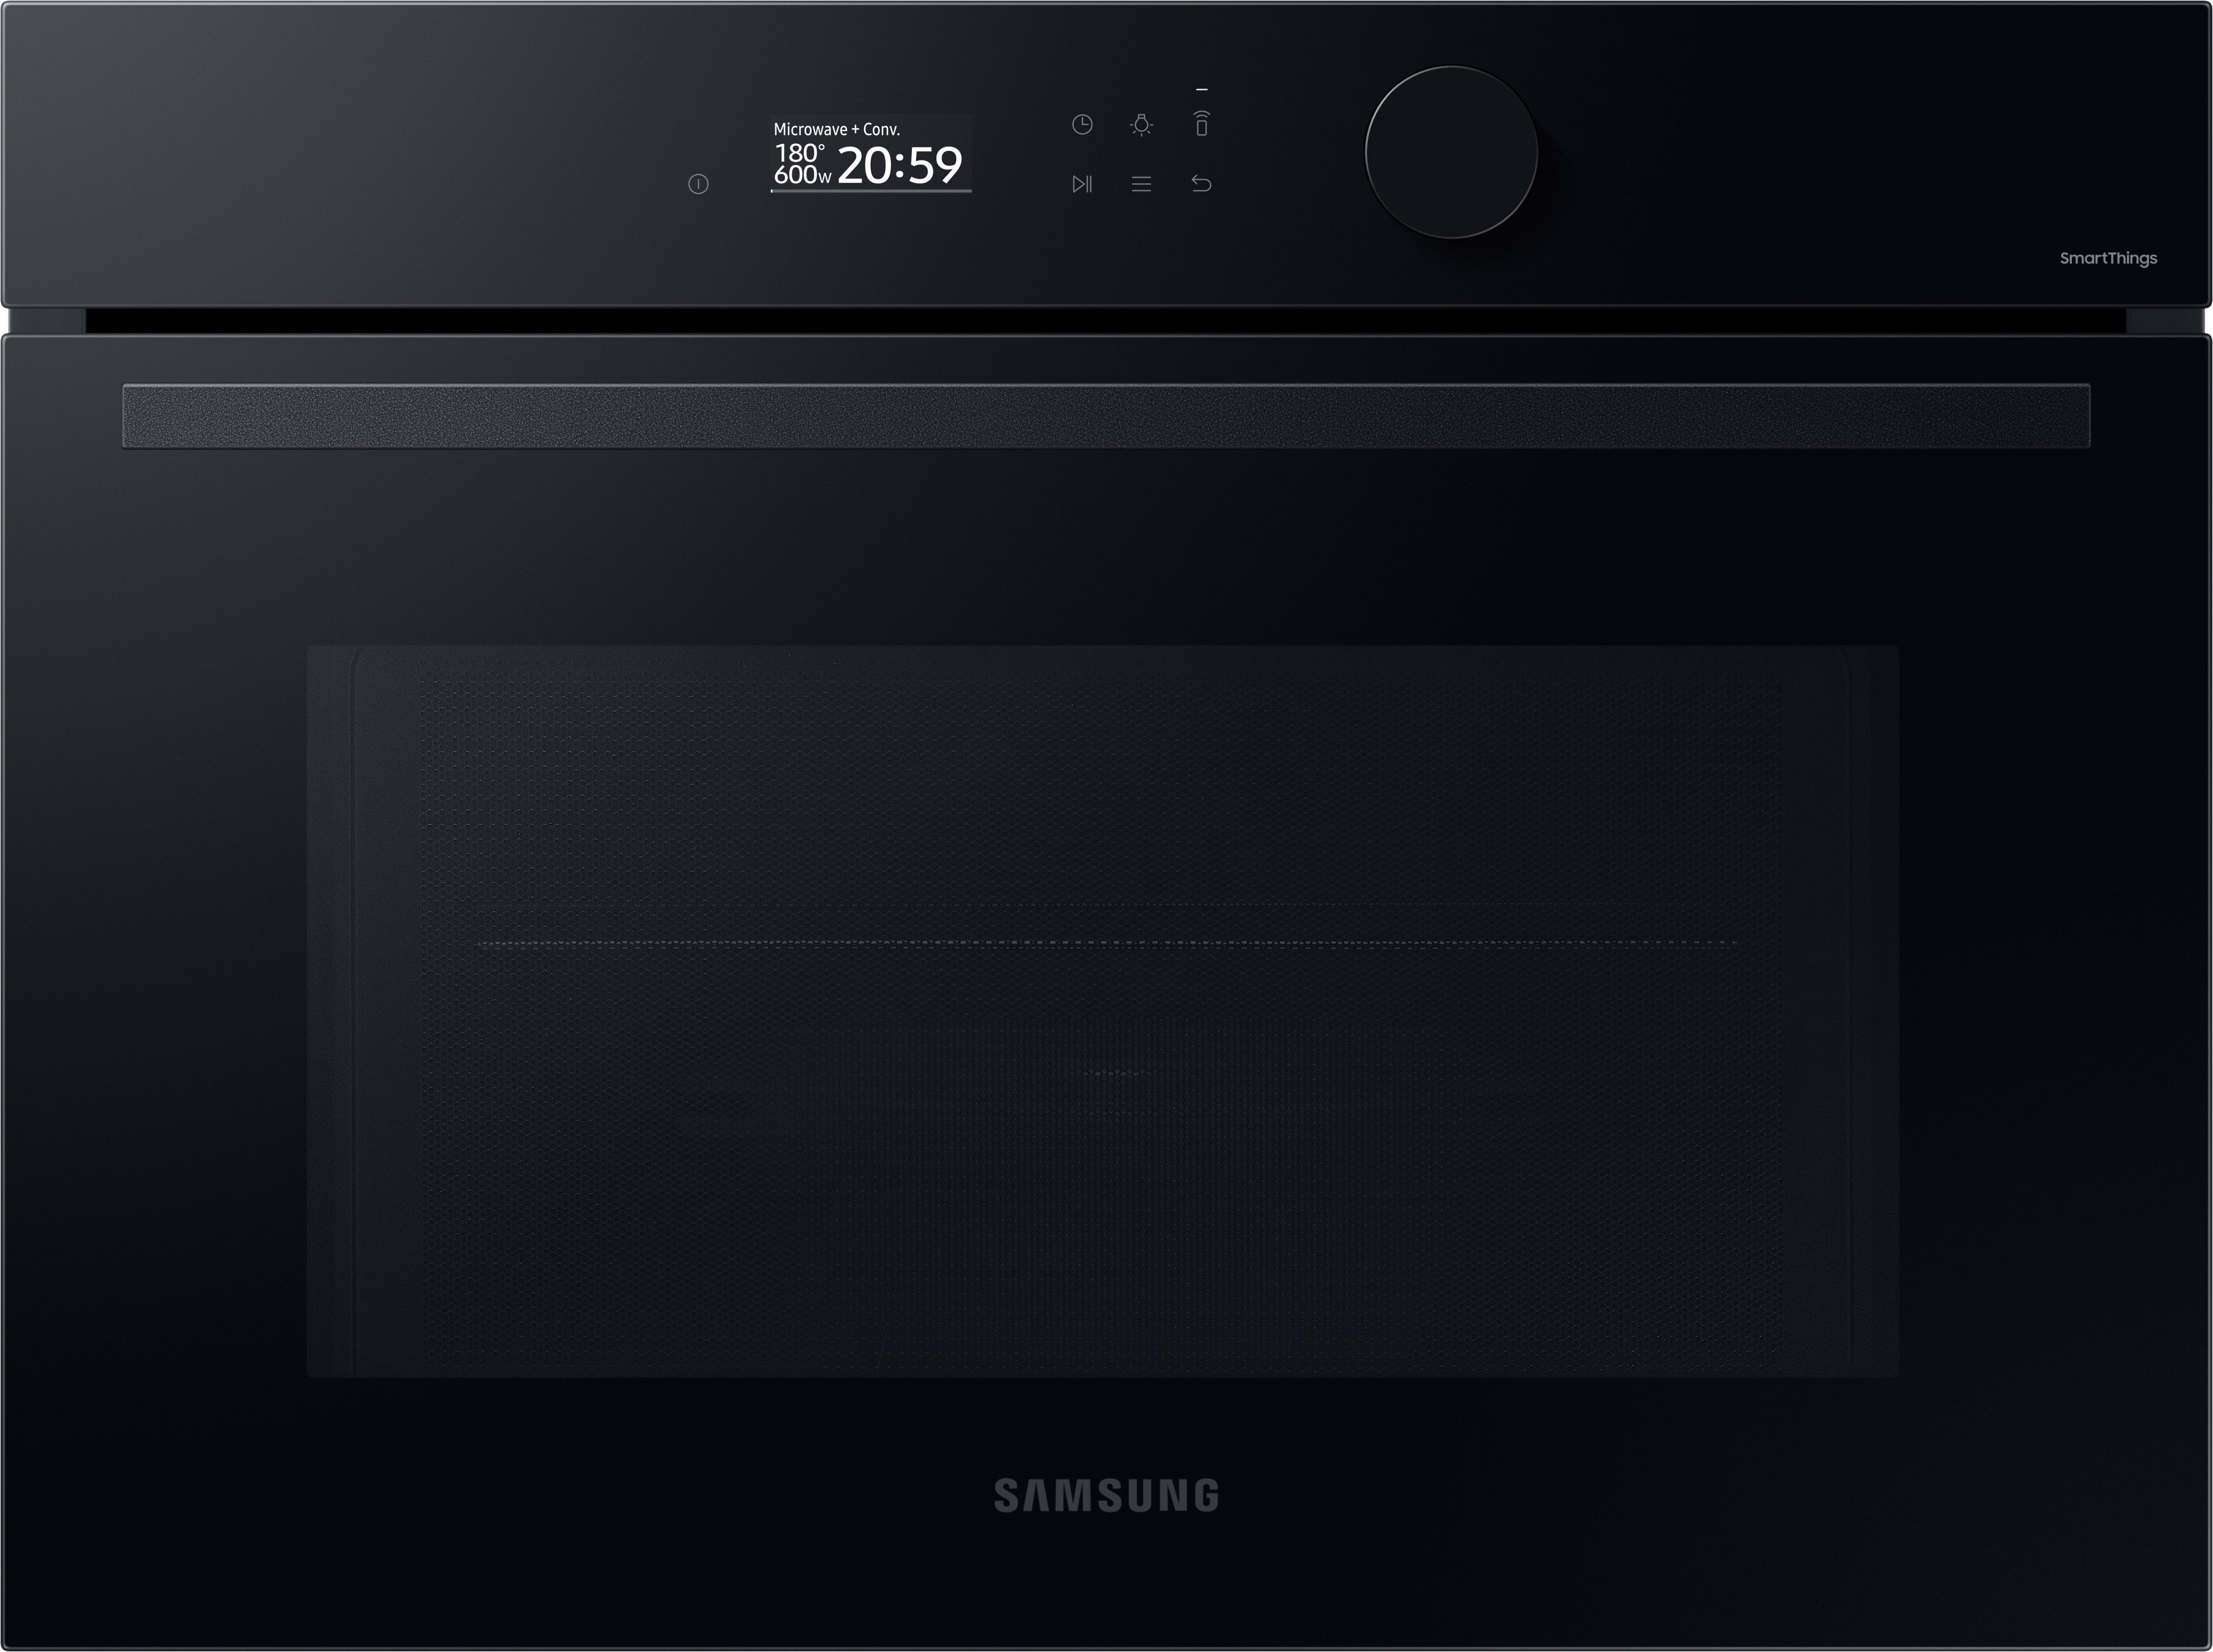 Samsung Bespoke Series 5 NQ5B5763DBK Wifi Connected Built In Compact Electric Single Oven with Microwave Function - Black Glass, Black